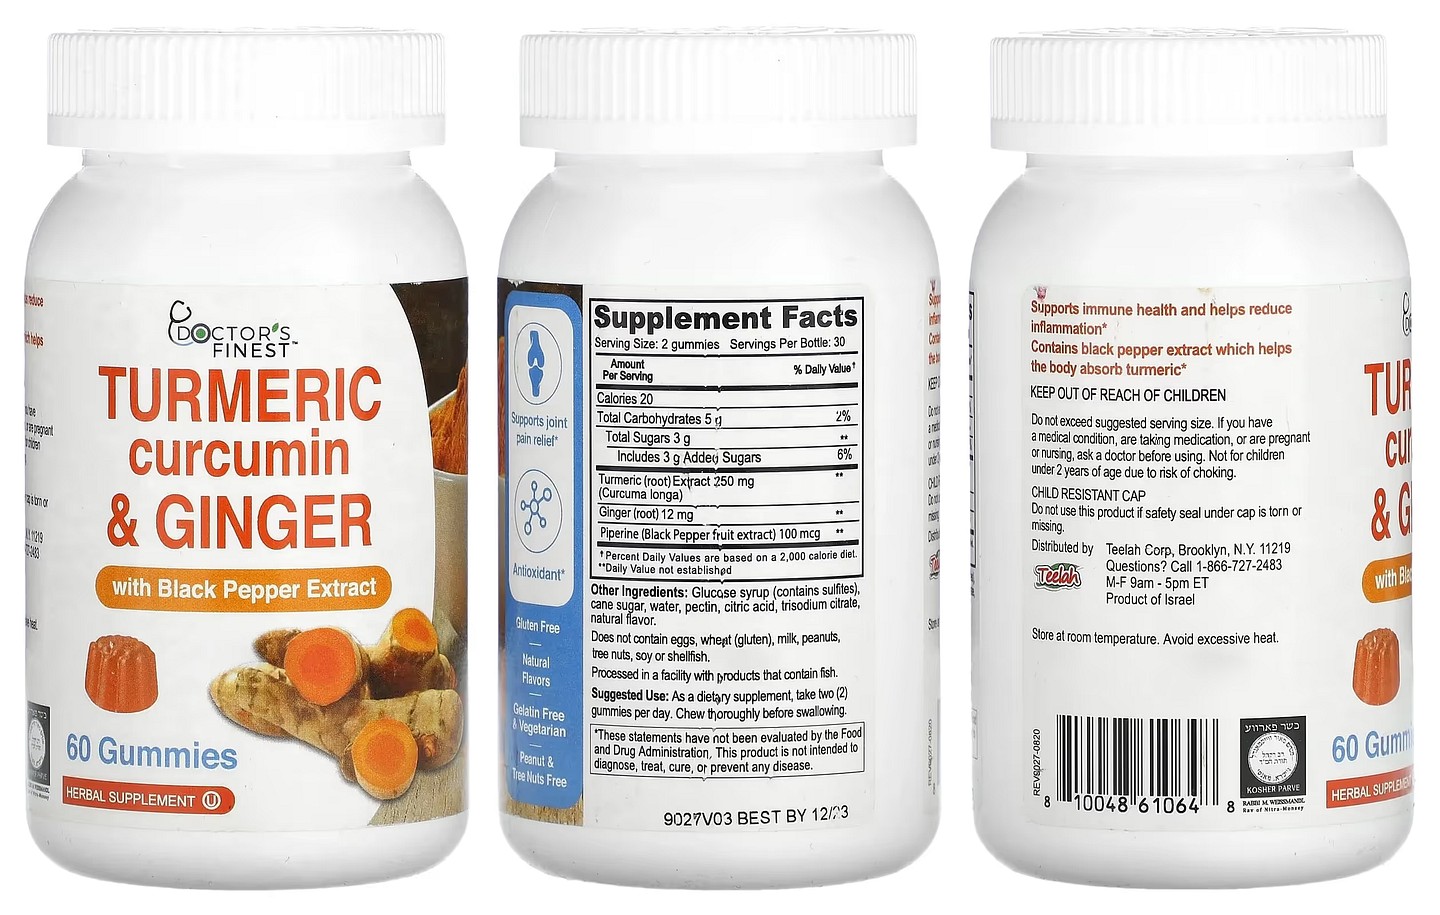 Doctor's Finest, Turmeric Curcumin & Ginger with Black Pepper Extract packaging